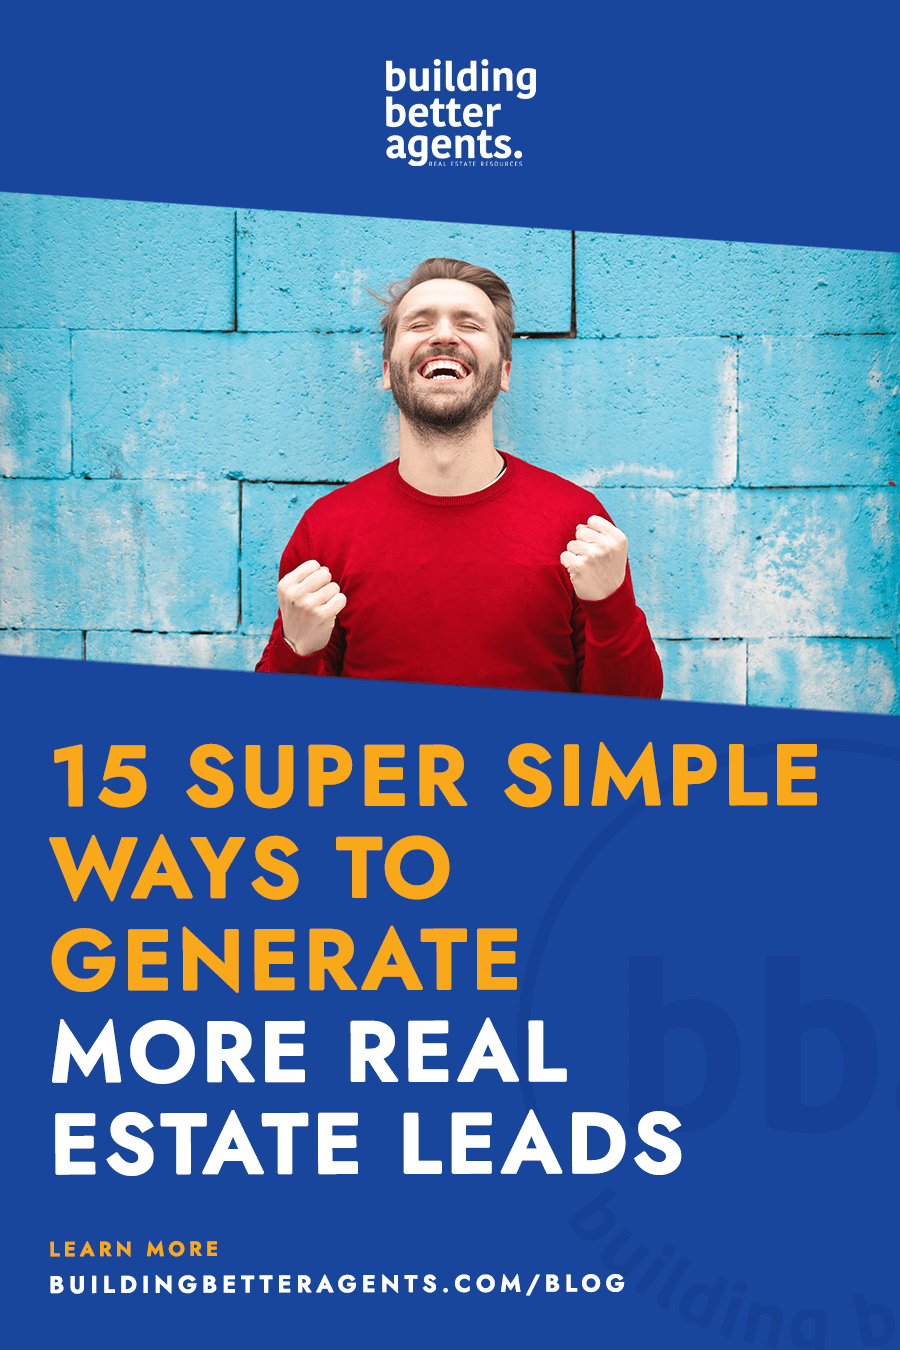 15 Super Simple Ways to Generate More Real Estate Leads